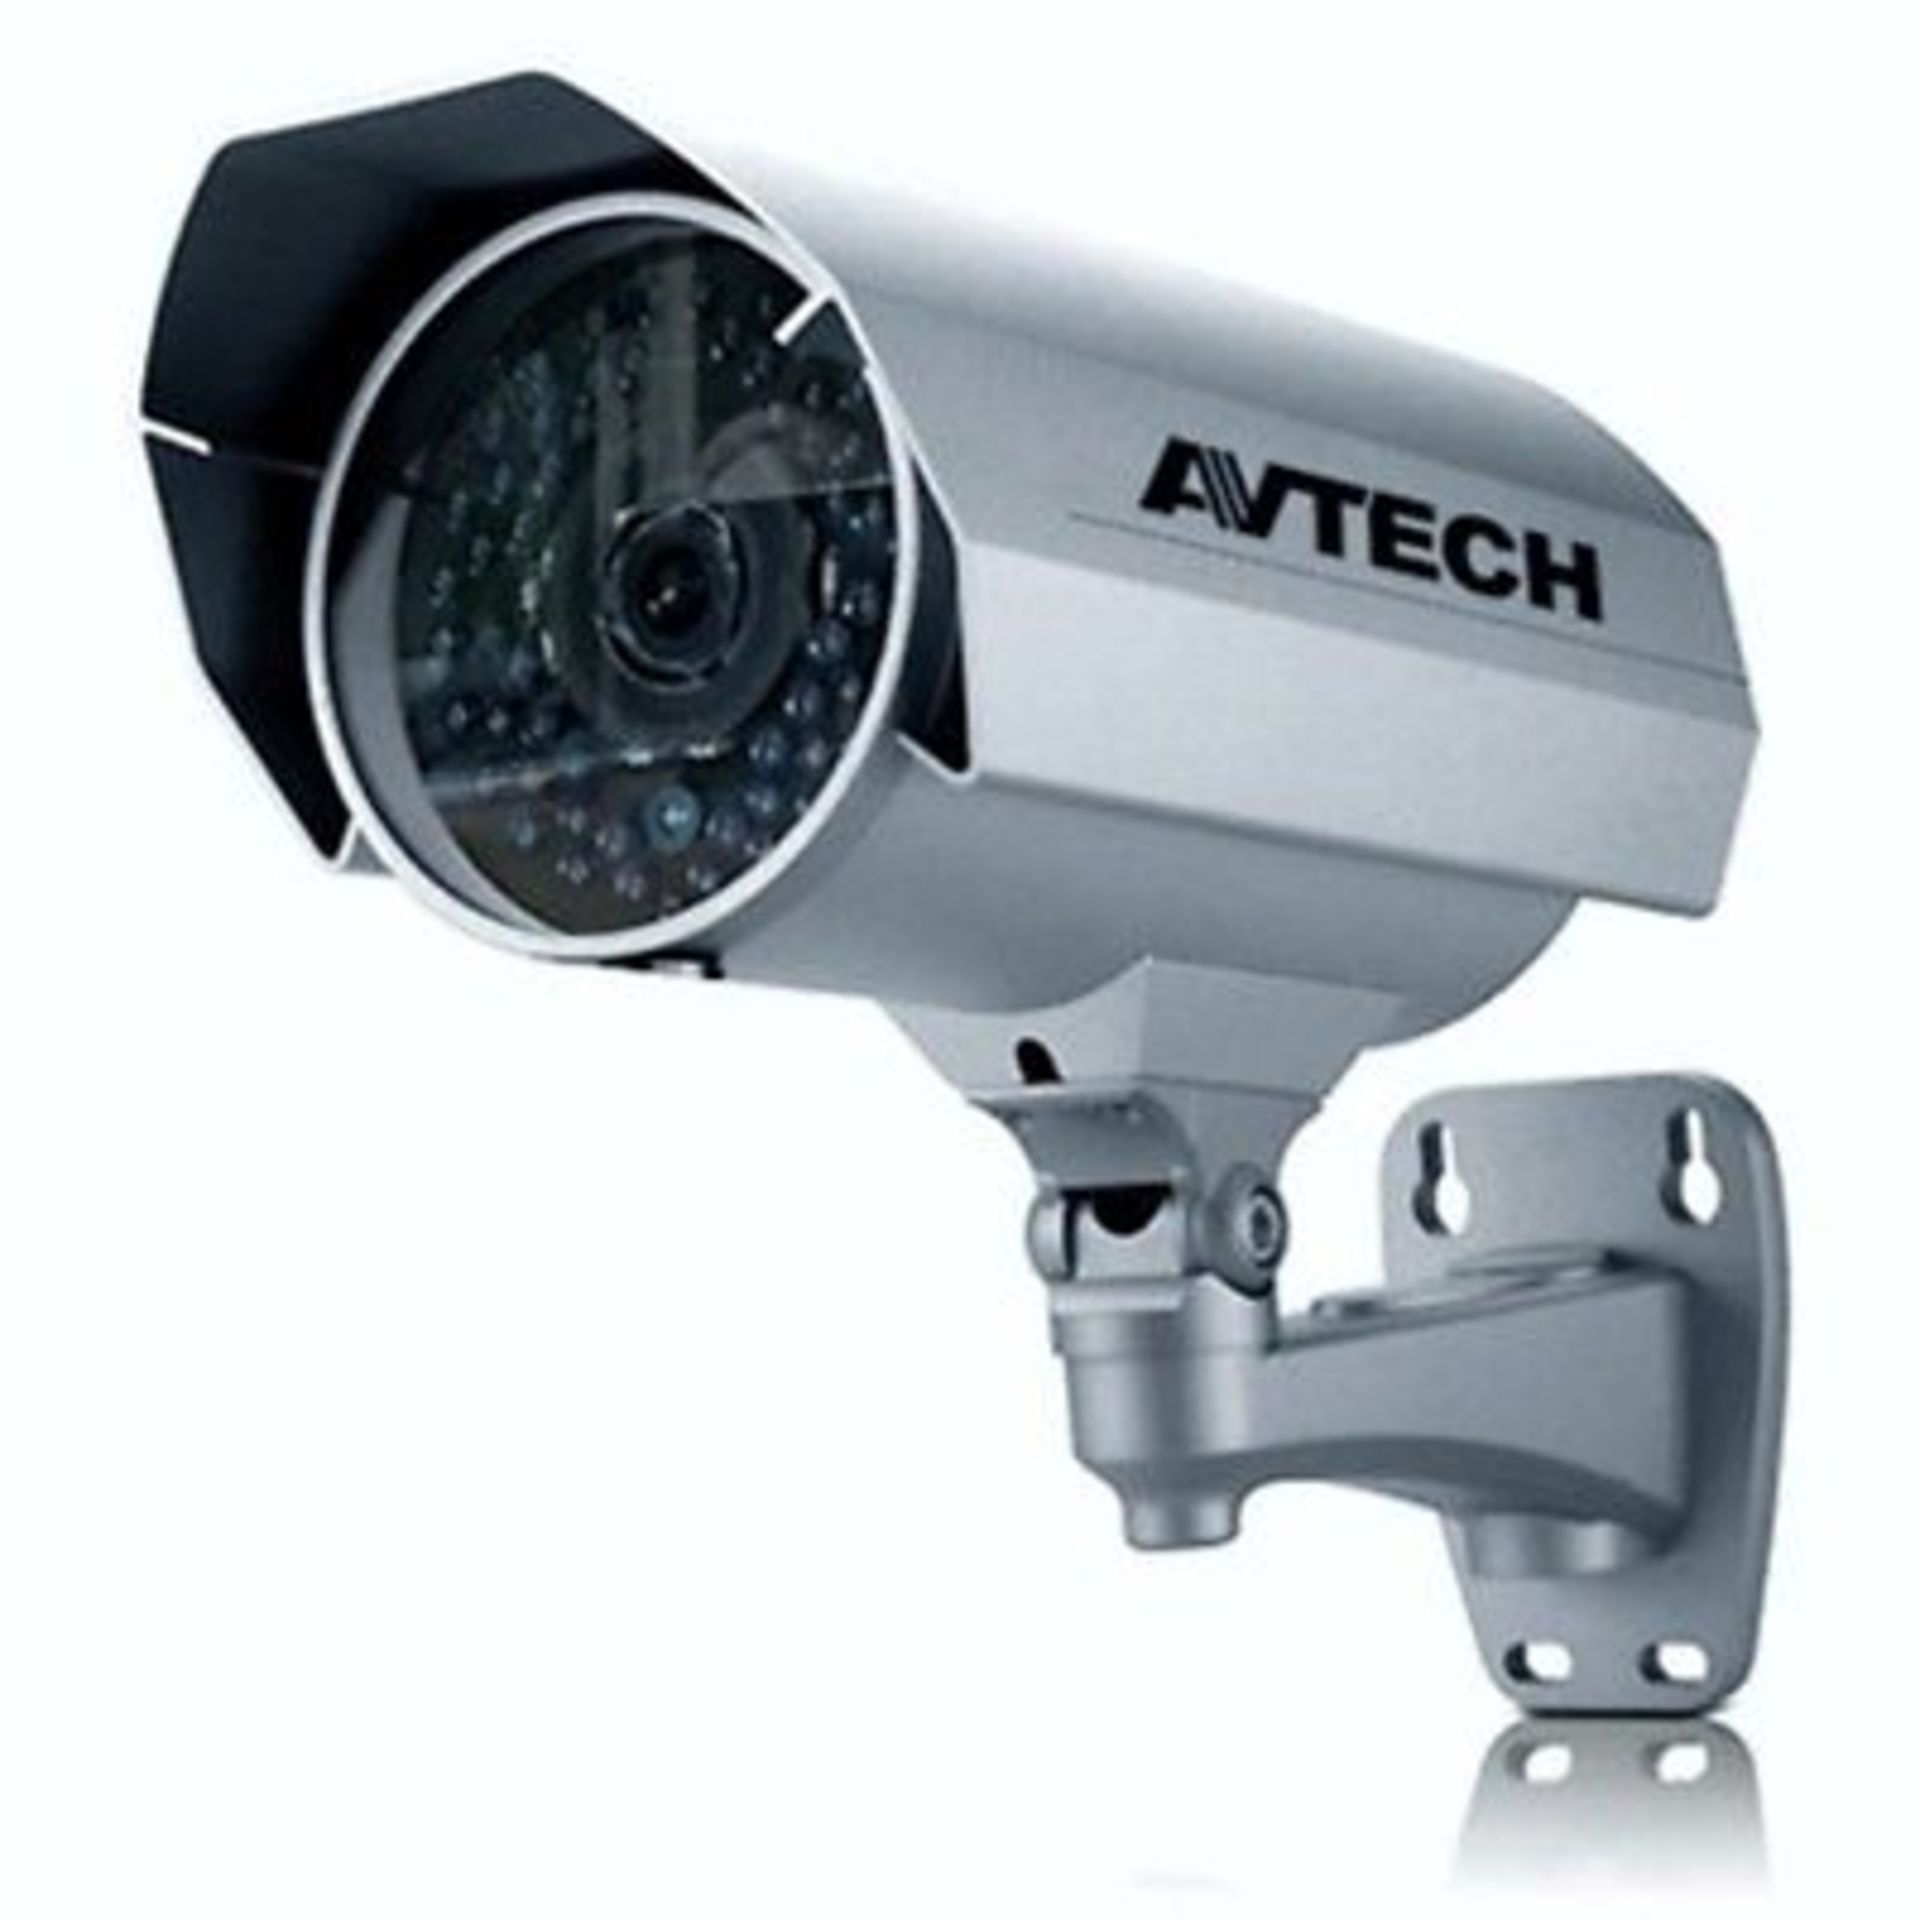 V *TRADE QTY* Brand New Avtech VGA IR Bullet Camera - Cable Management- IP67 X 4 YOUR BID PRICE TO